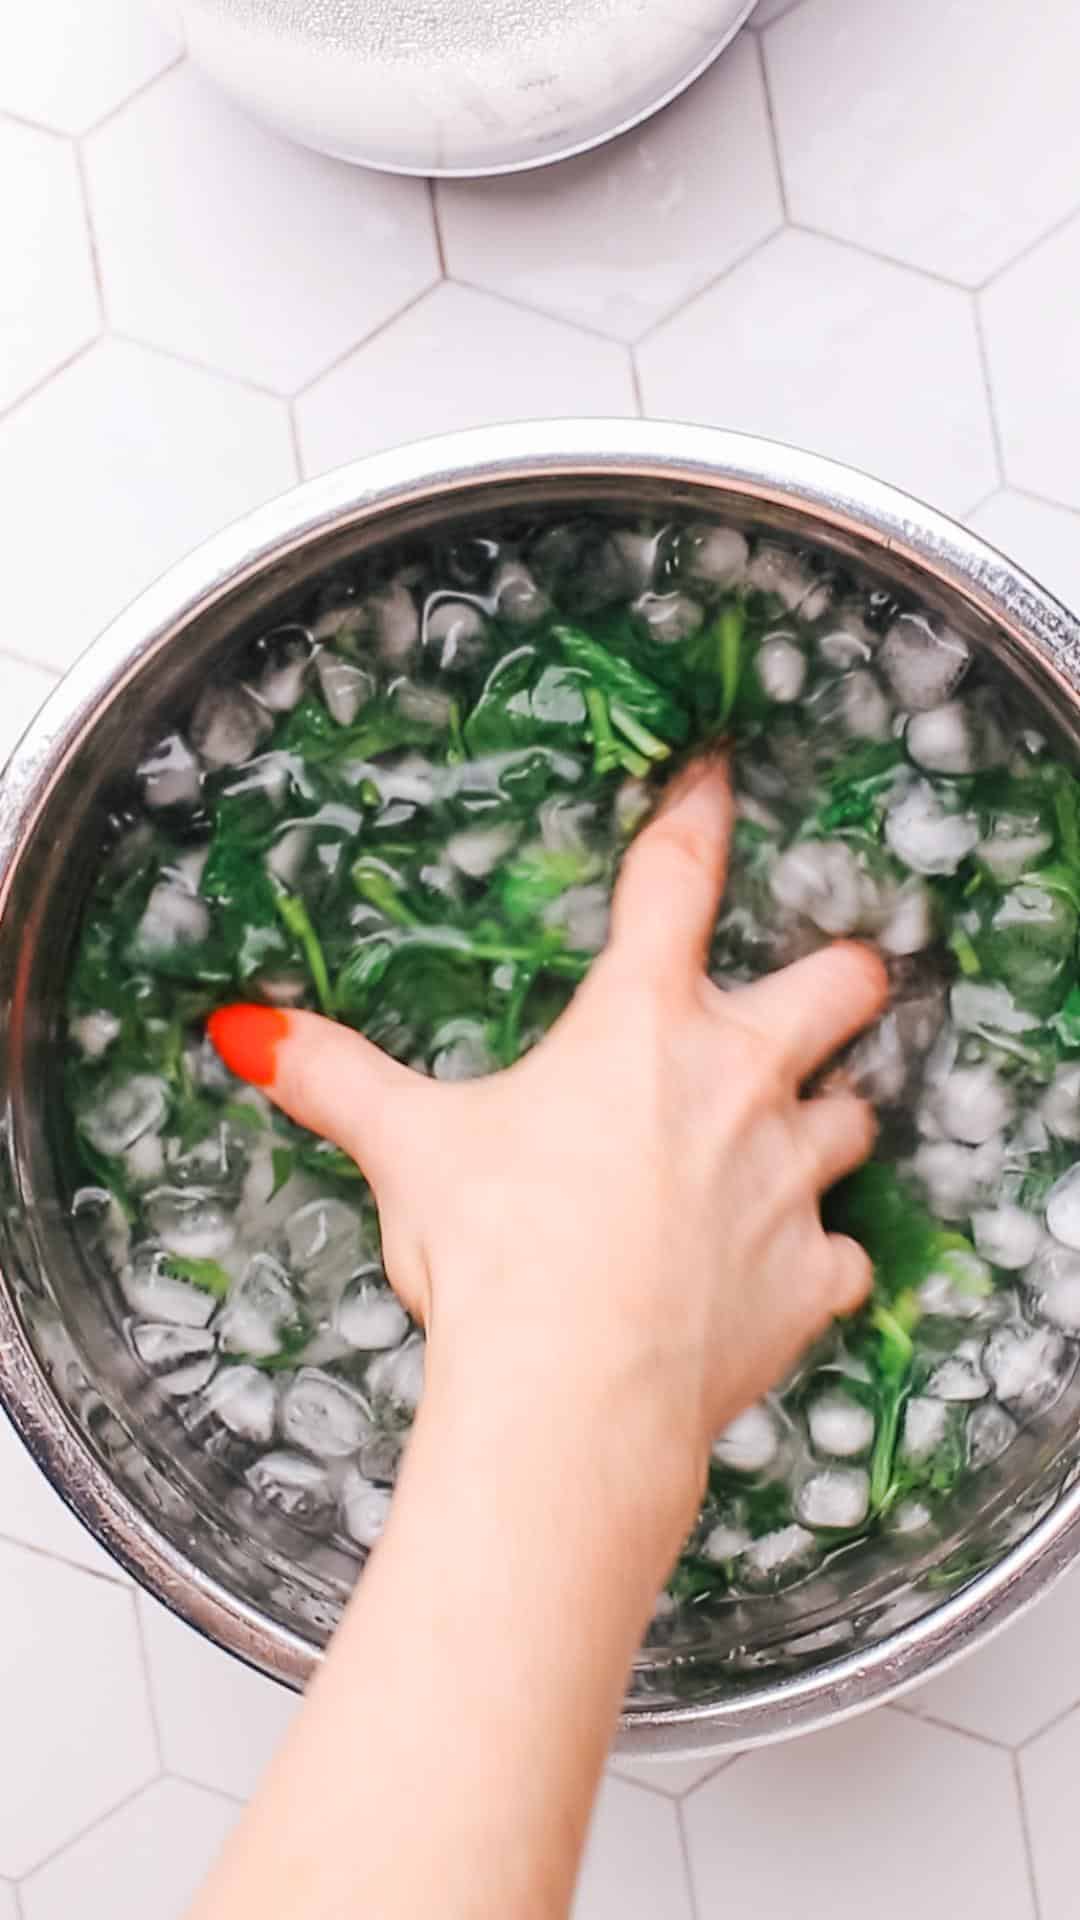 Soaking spinach in cold water